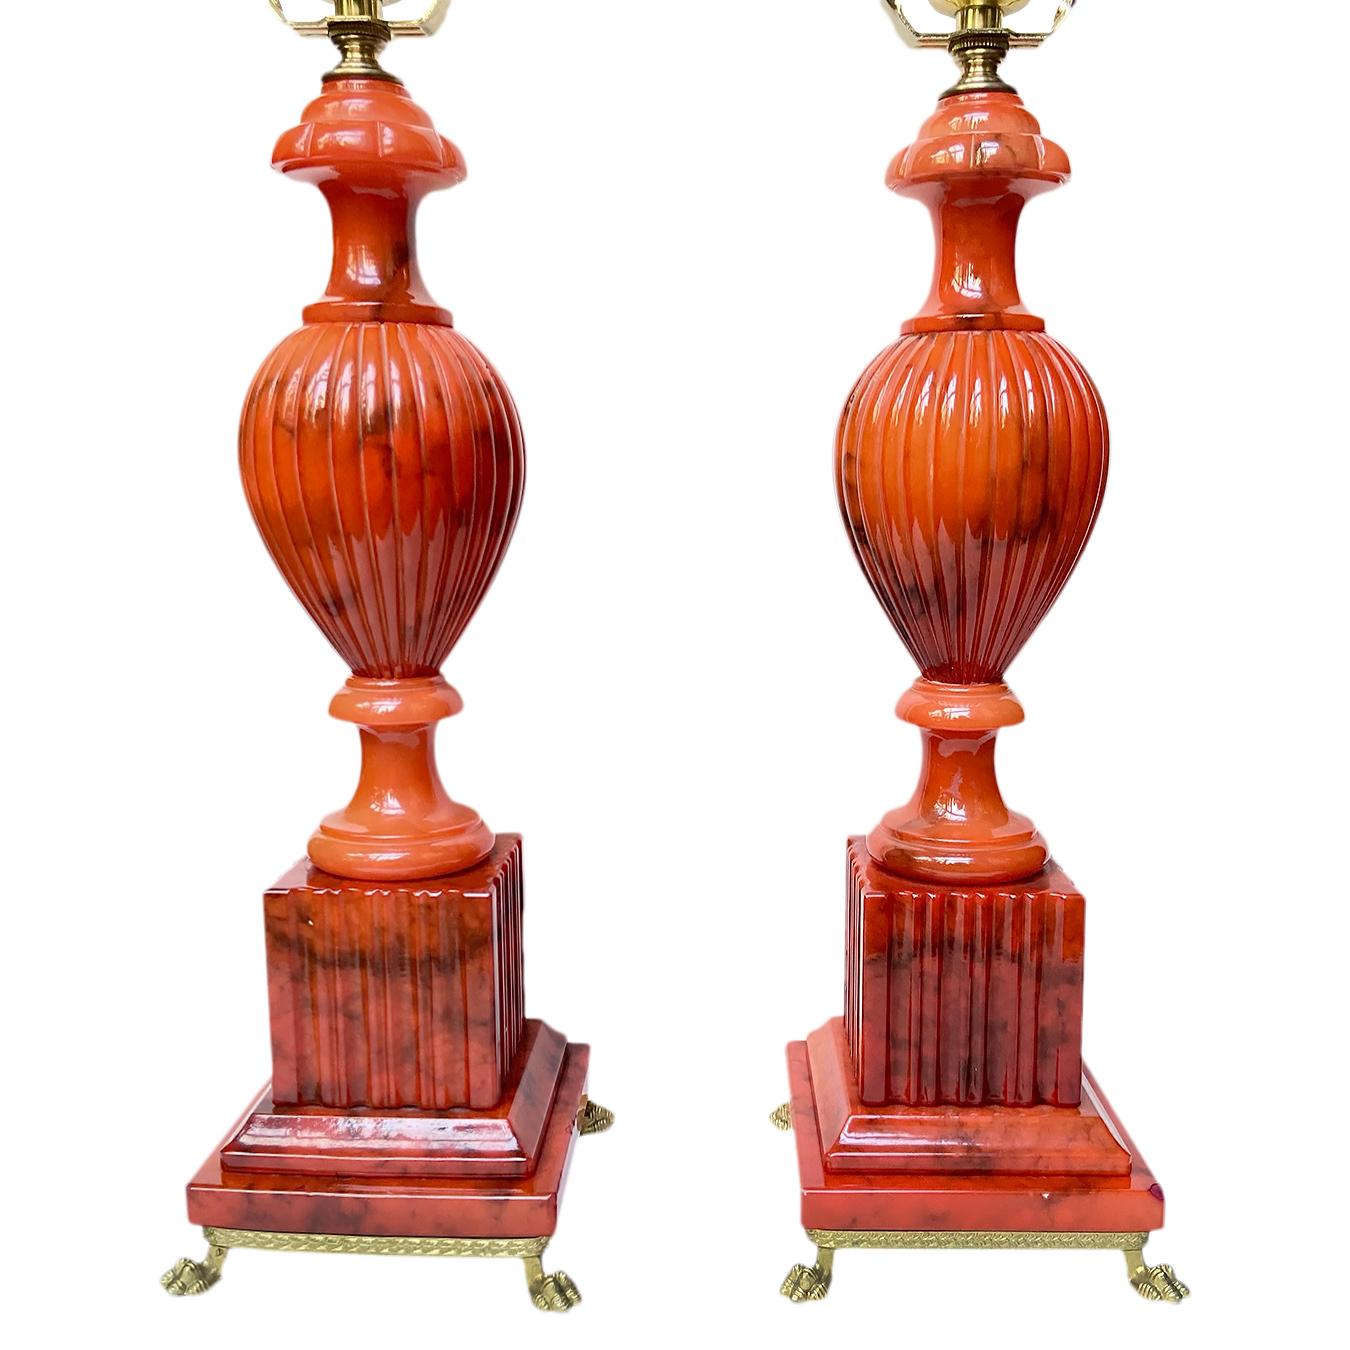 Pair of circa 1940's Italian coral-colored carved alabaster lamps with footed bronze bases.

Measurements:
Height of body 14.5